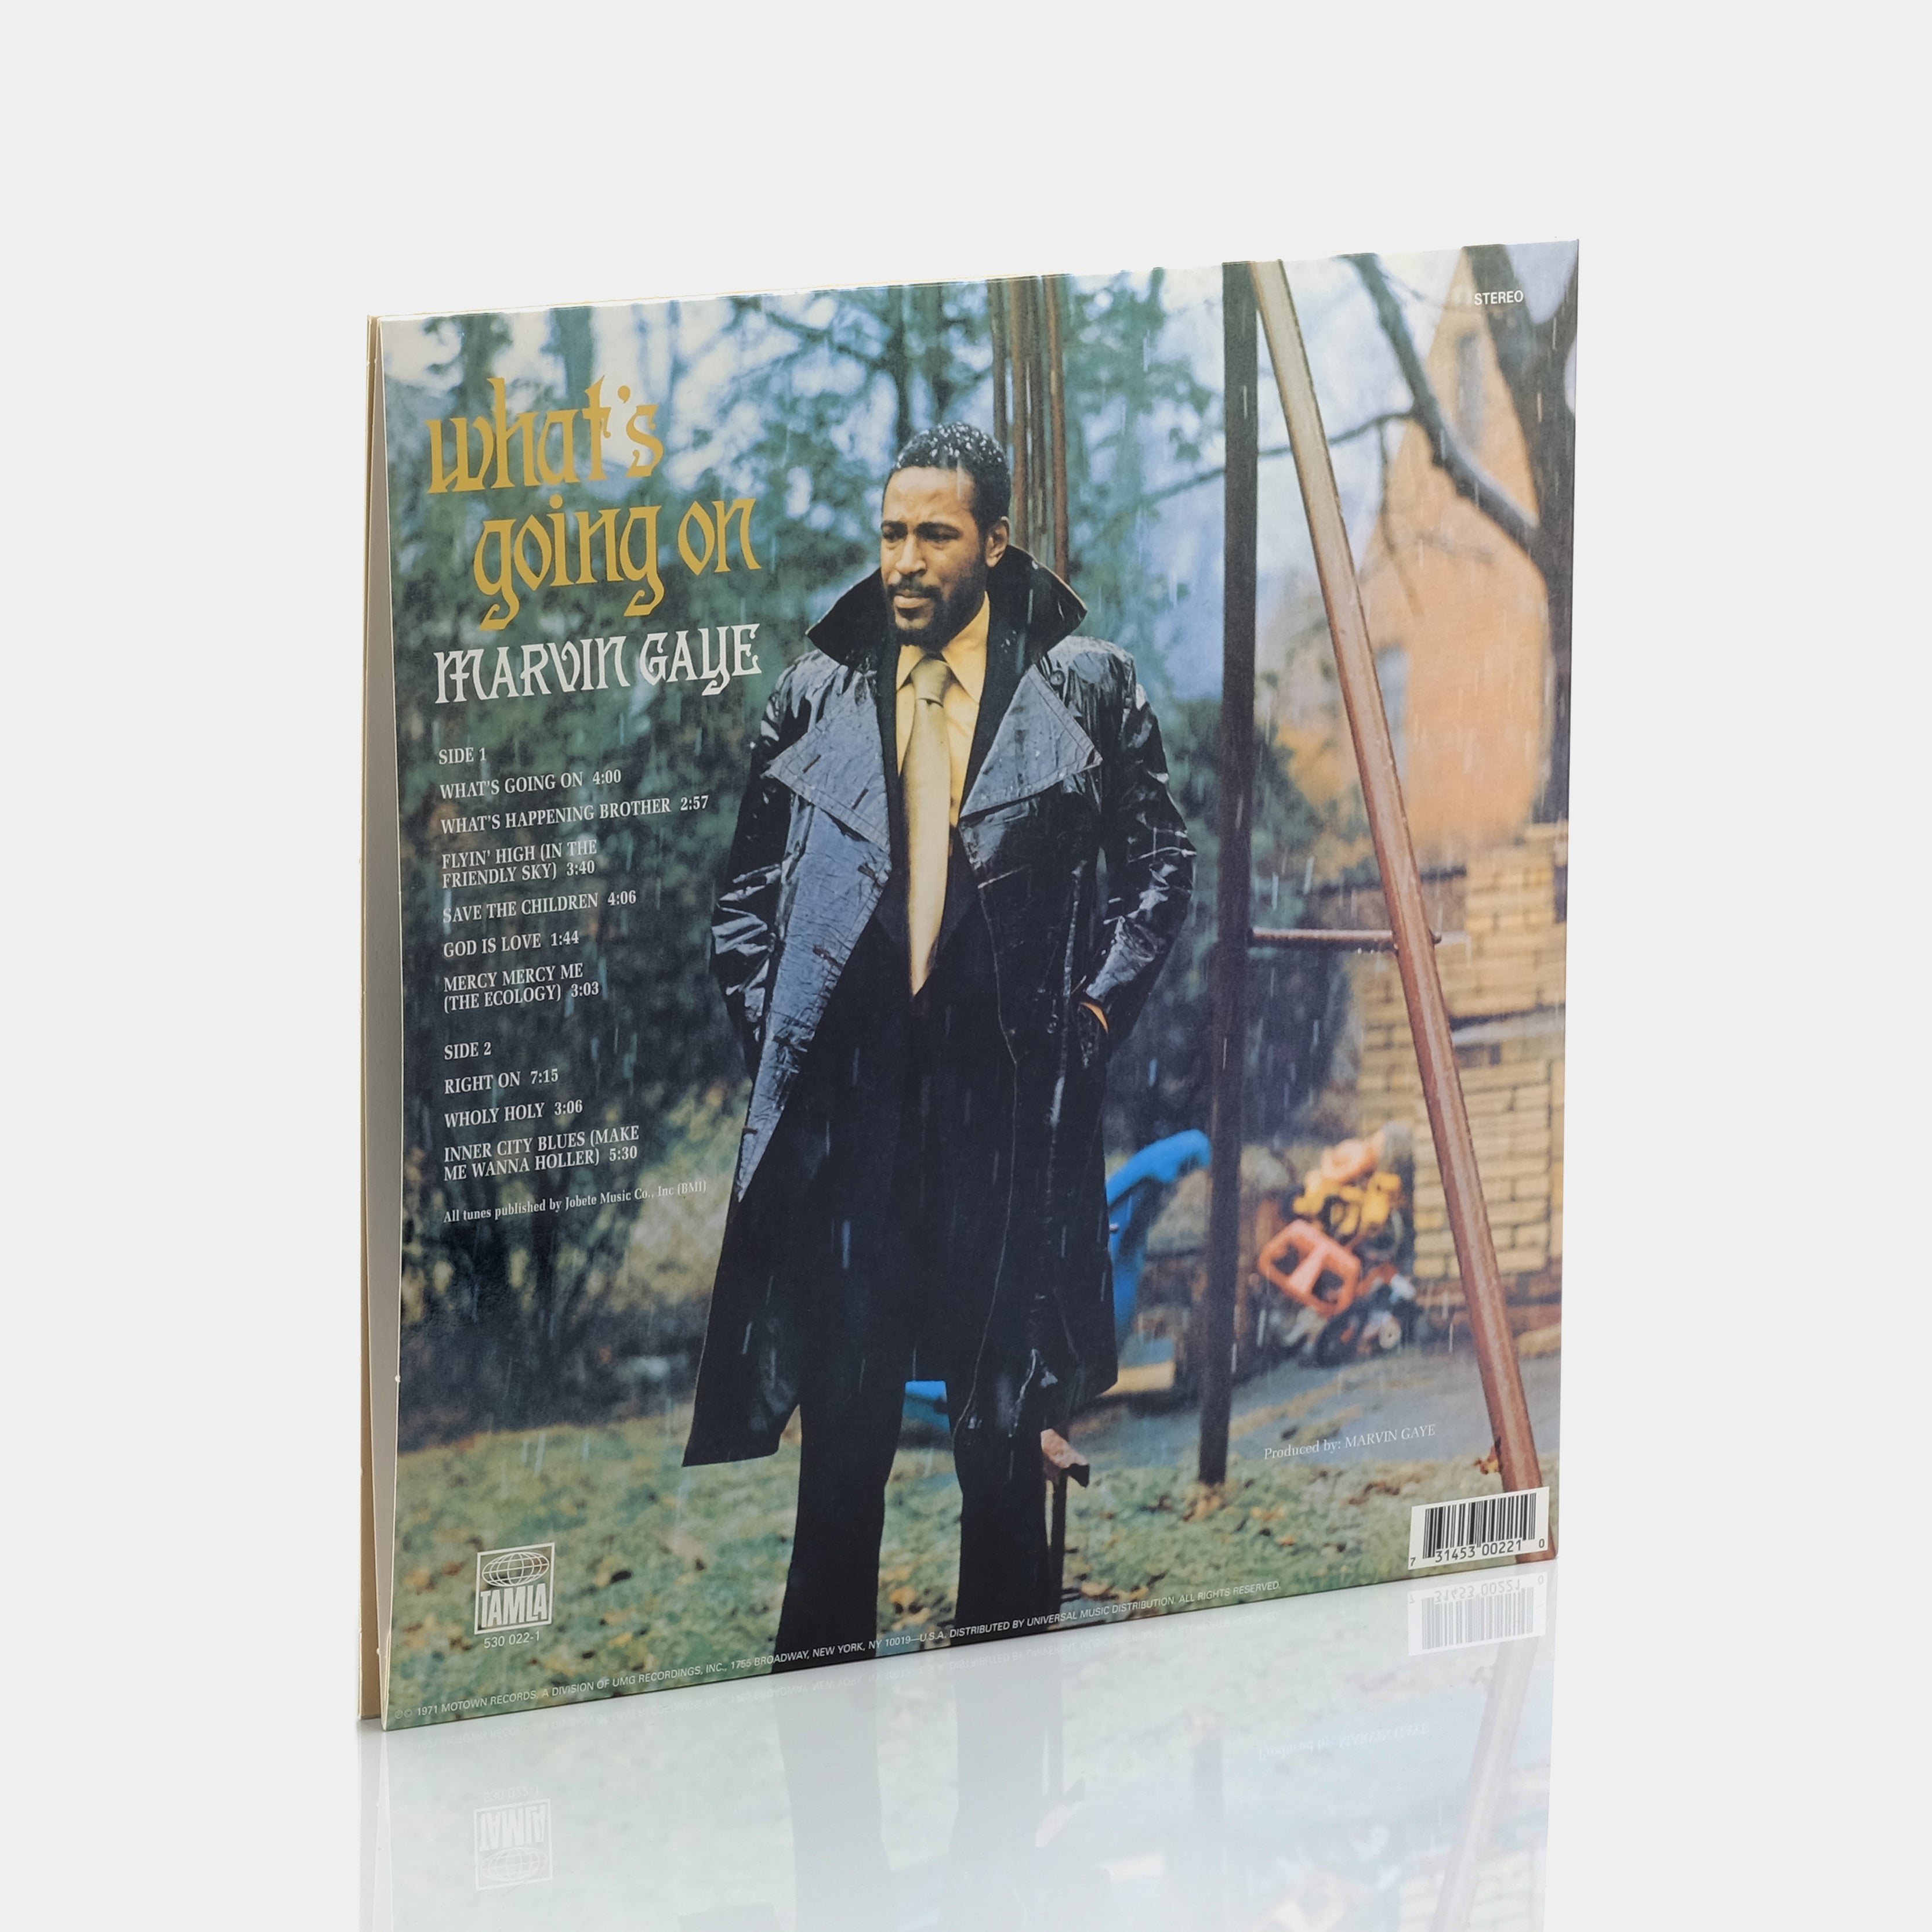 Marvin Gaye - What's Going On LP Swamp Green Vinyl Record